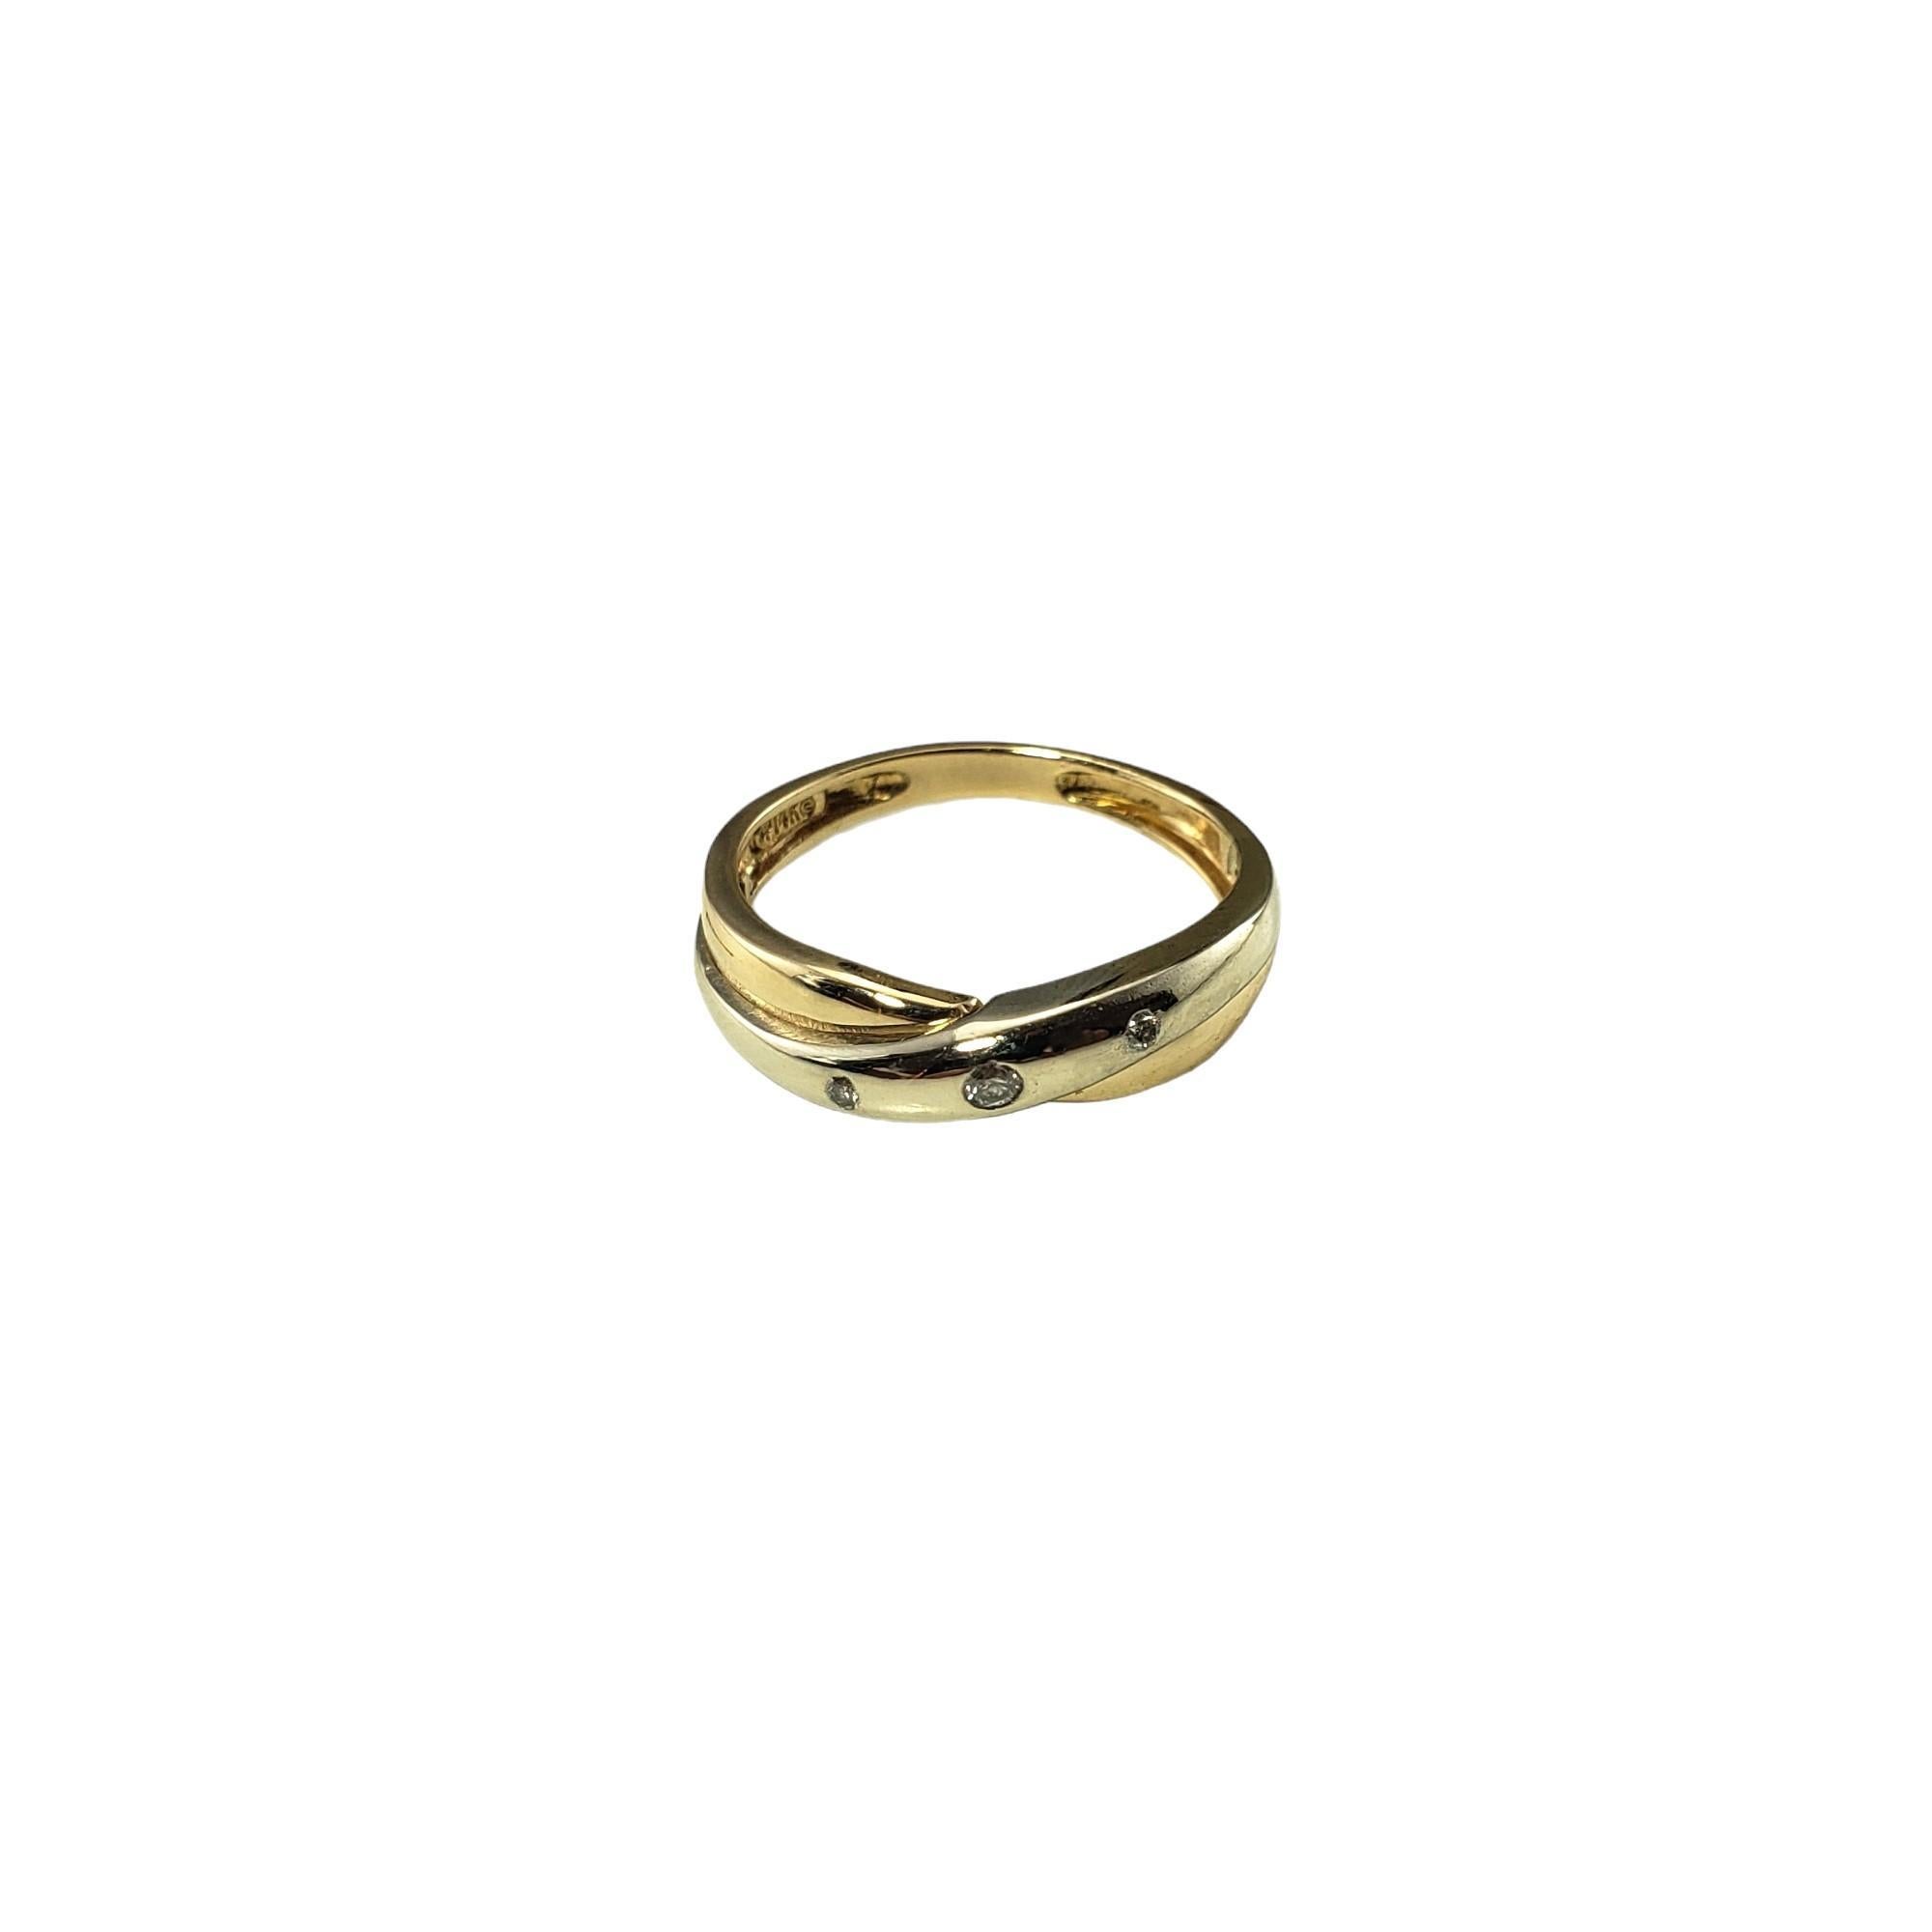 Vintage 14 Karat Yellow Gold Band Ring Size 7-

This elegant band features three round brilliant cut diamonds set in classic 14K yellow gold.  Width: 5 mm.  Shank: 2 mm.

Approximate total diamond weight: .05 ct.

Diamond color: H-I

Diamond